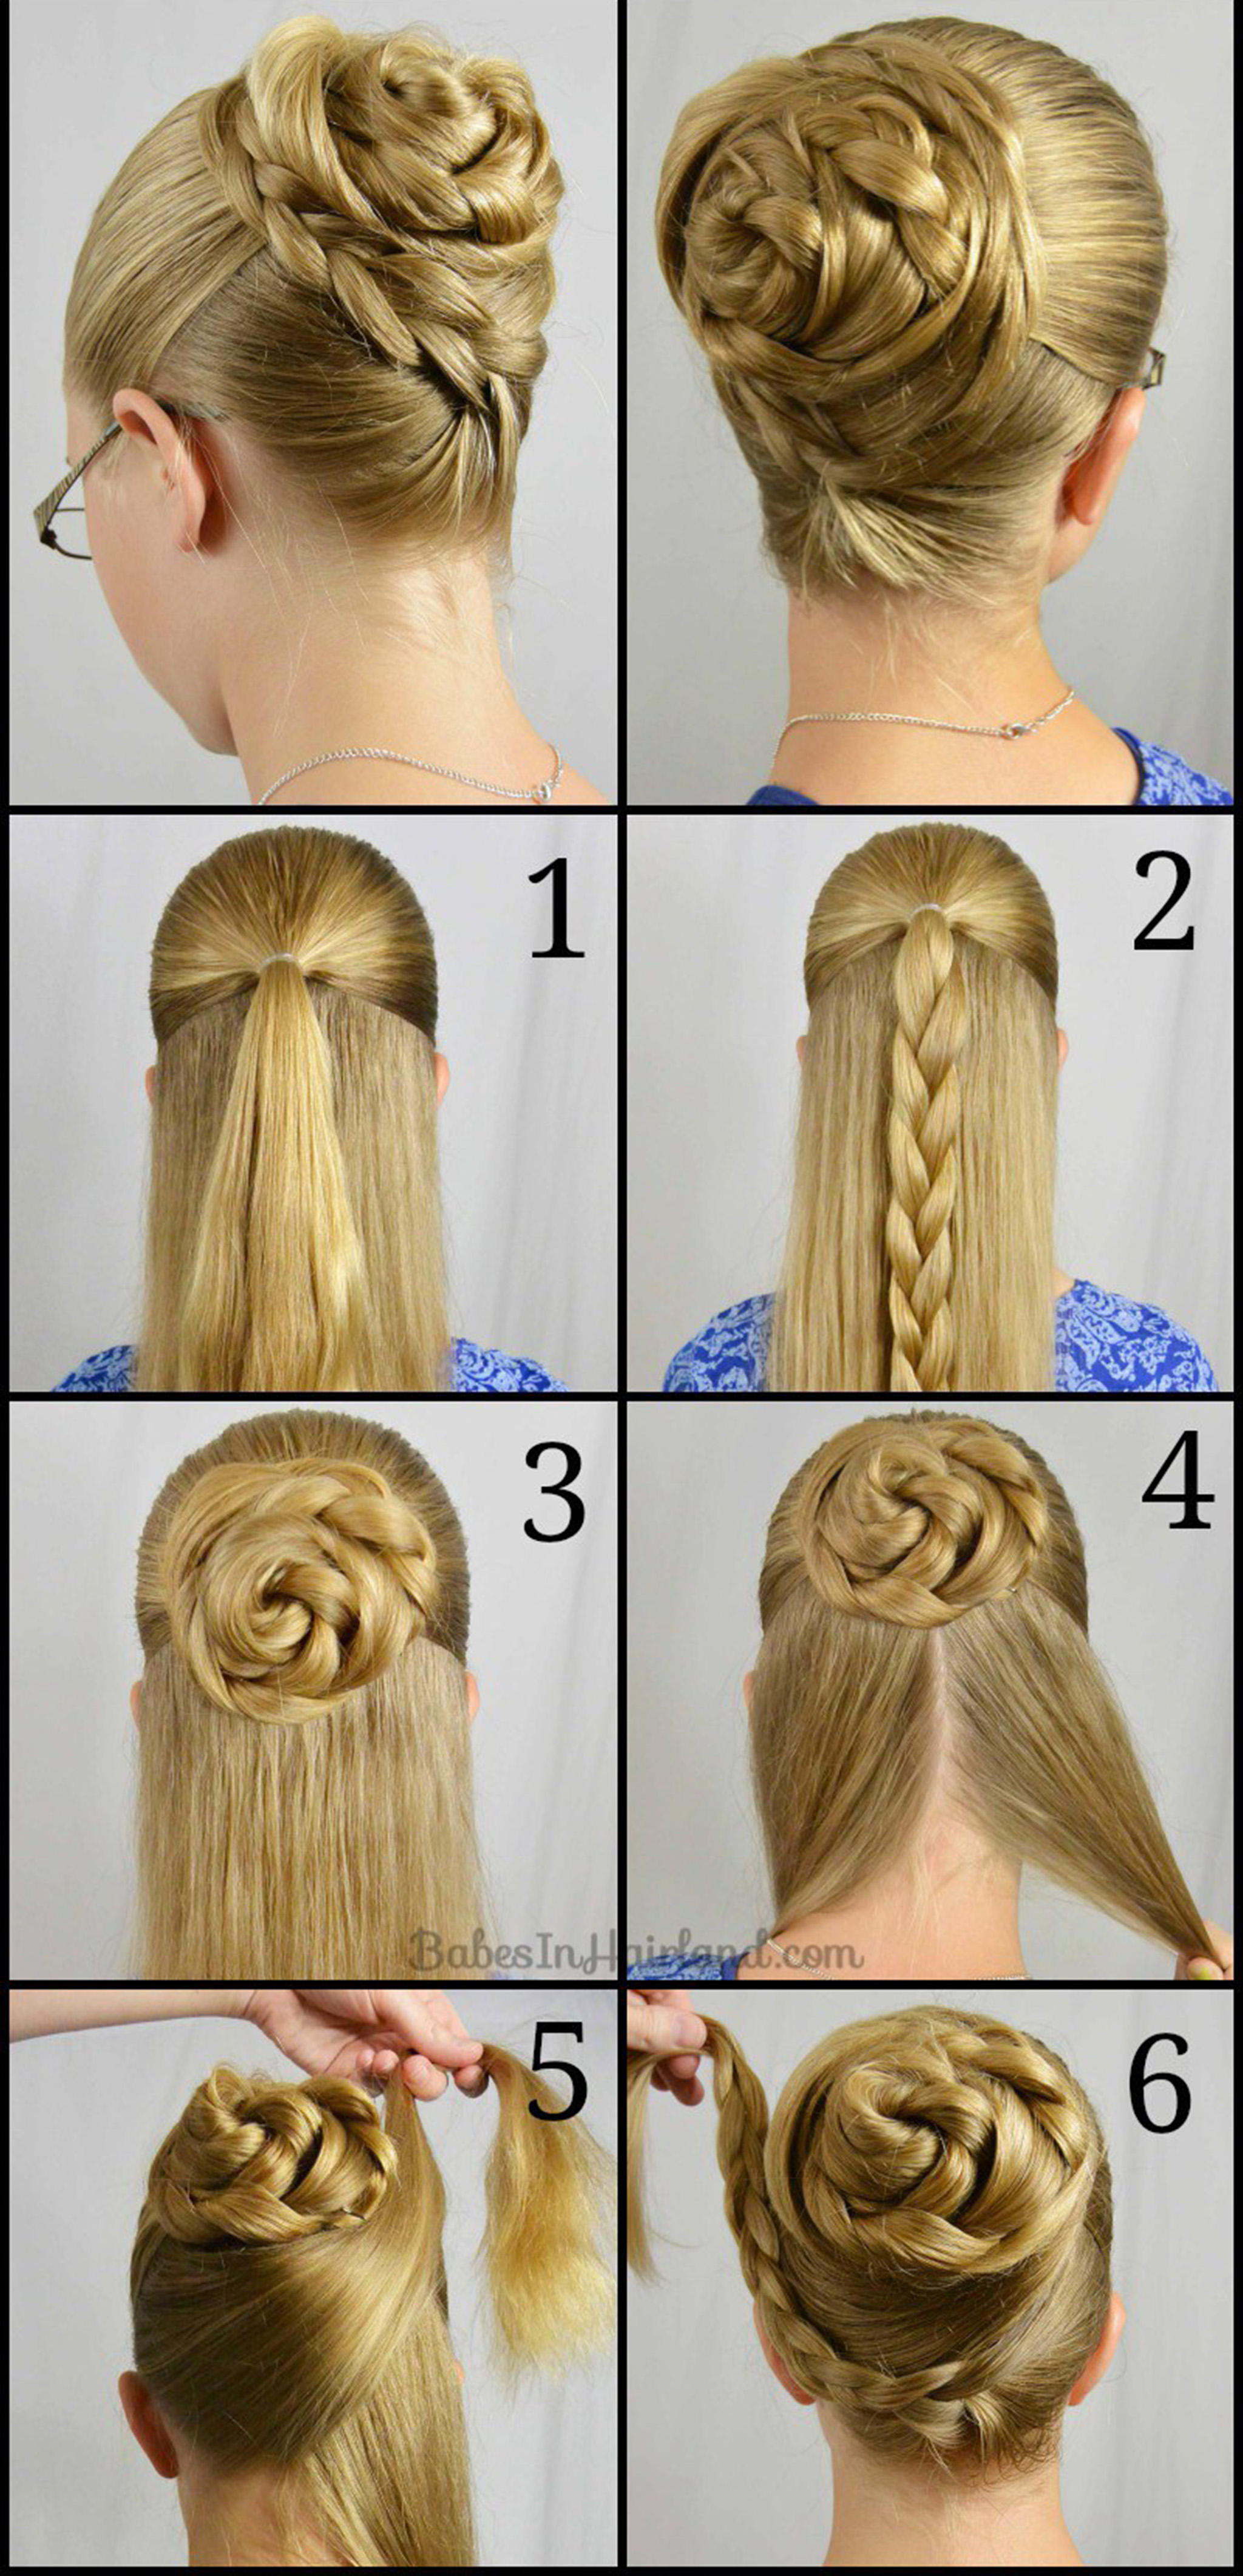 Top 10 Quick & Easy Braided Hairstyles Step By Step – Hairstyles